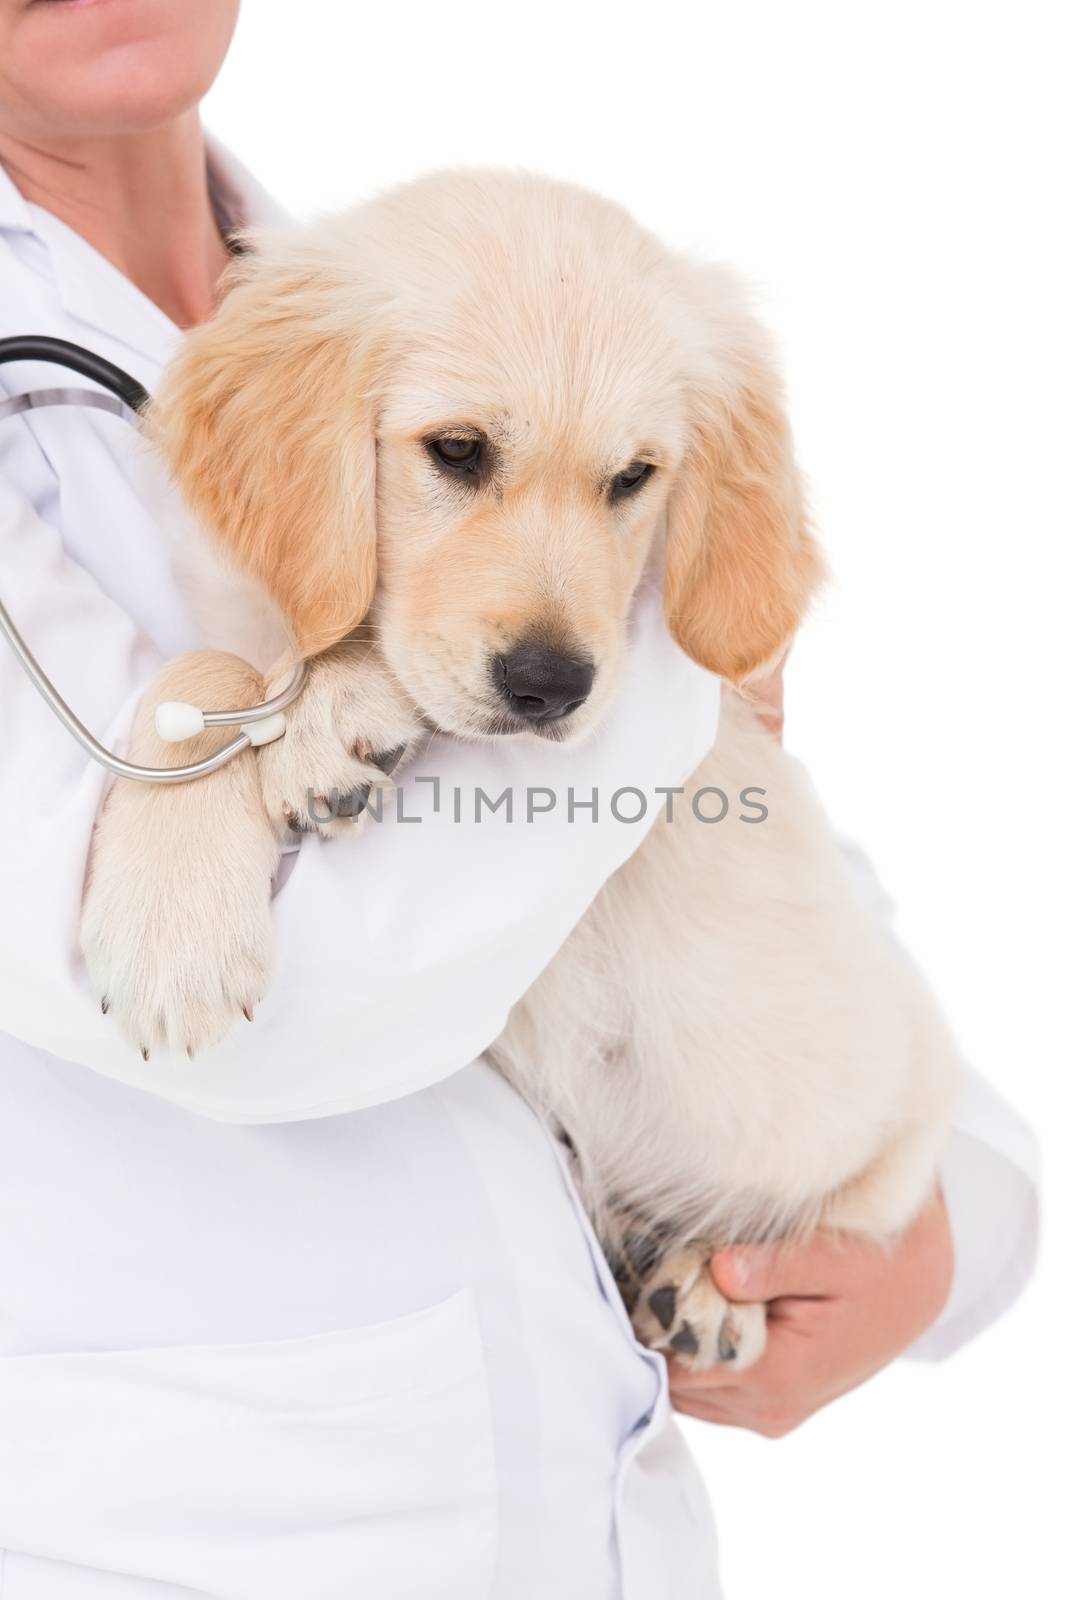 Veterinarian with a cute dog in her arms on white background 